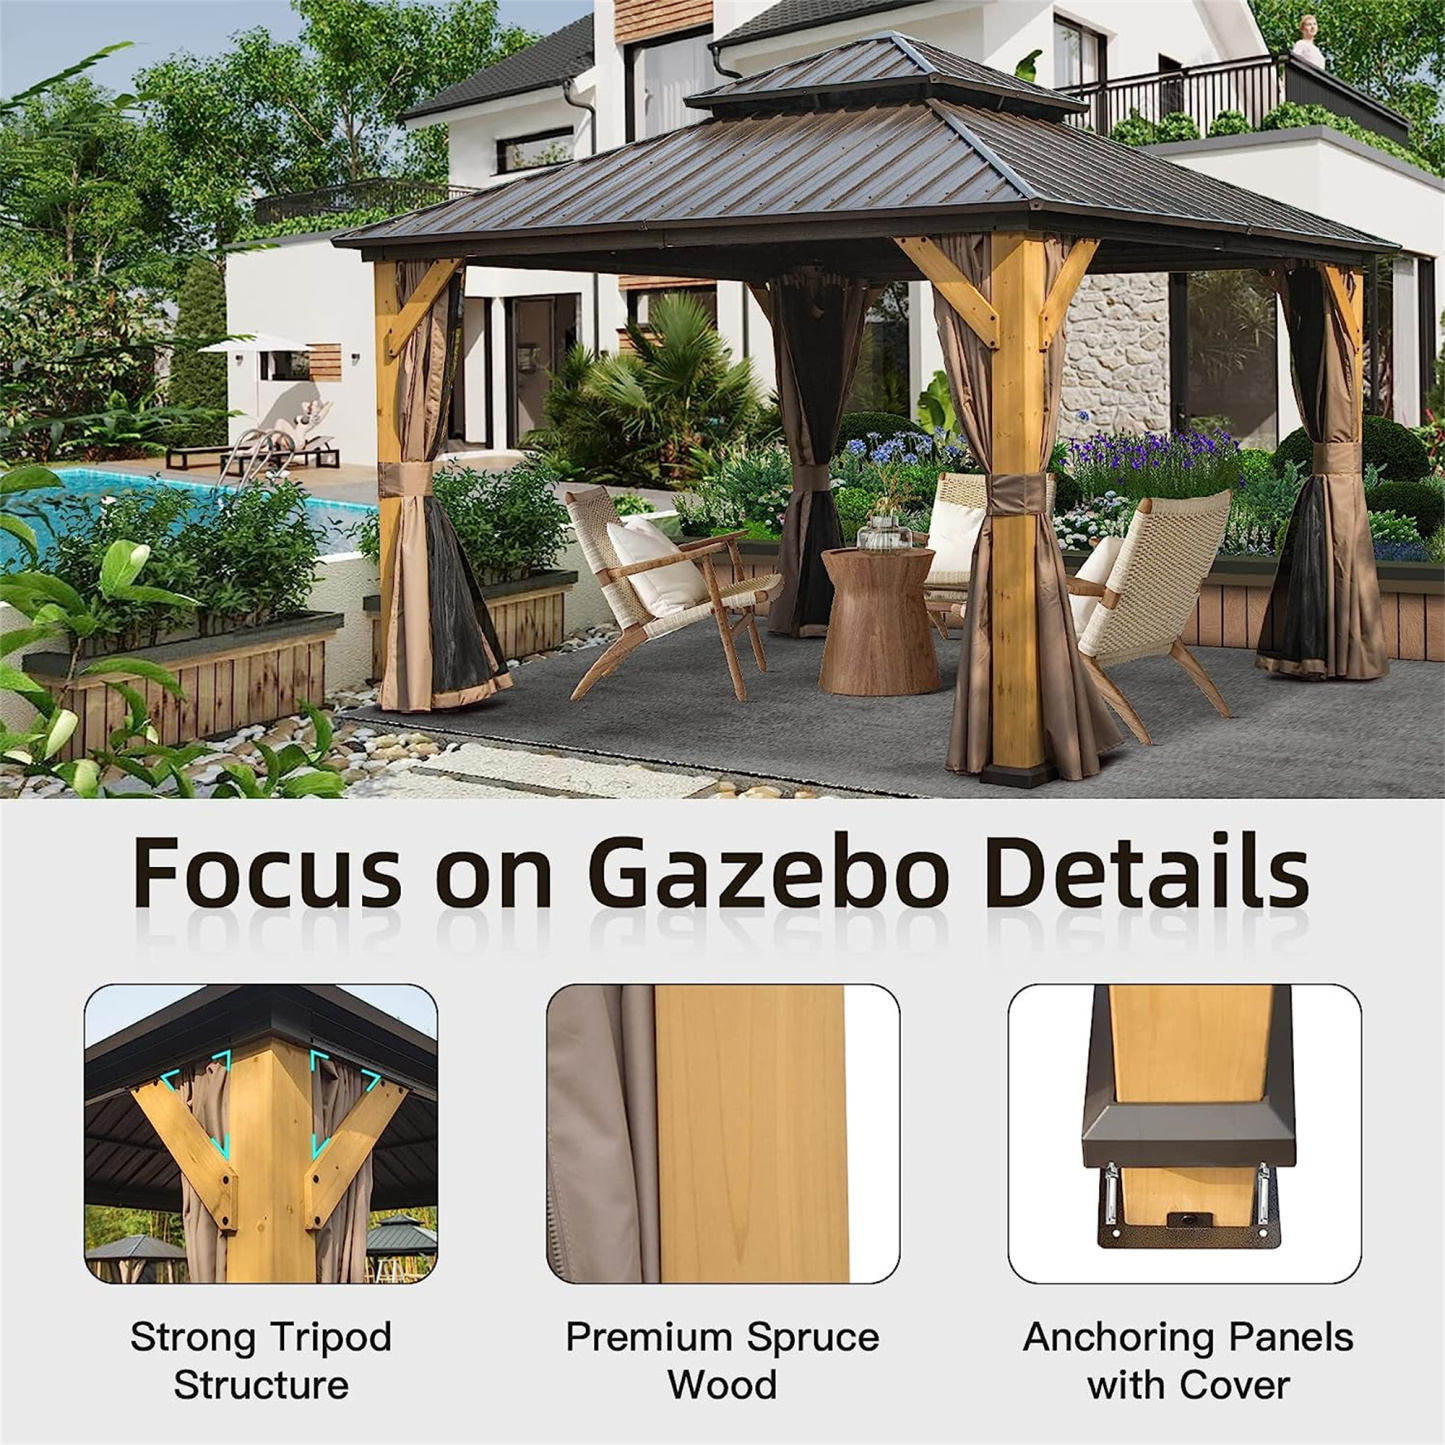 Mondawe 12 Ft x 12 Ft Solid Wood Patio Gazebo with Curtains and Netting for Patio Backyard and Lawn